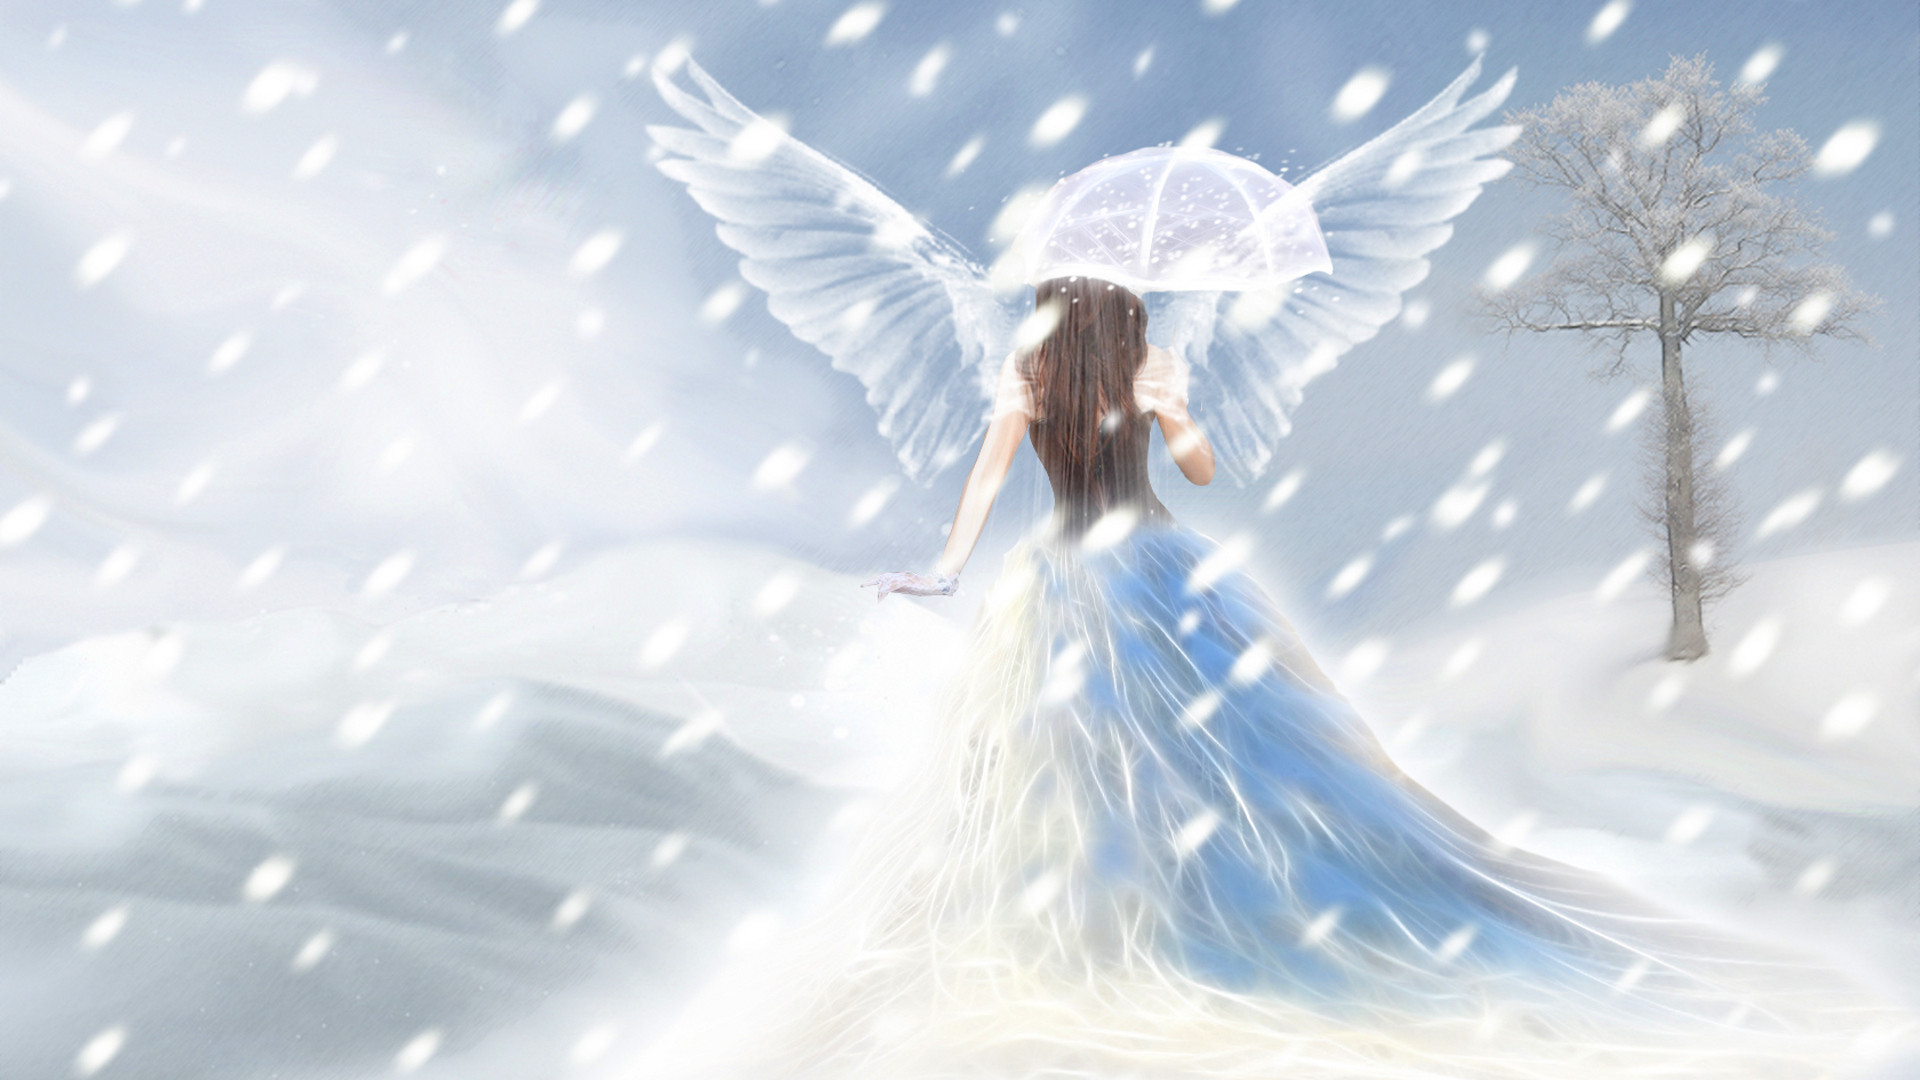 1920x1080 Healing Angel Graphic Share On Facebook | Imagefully.com | Images .